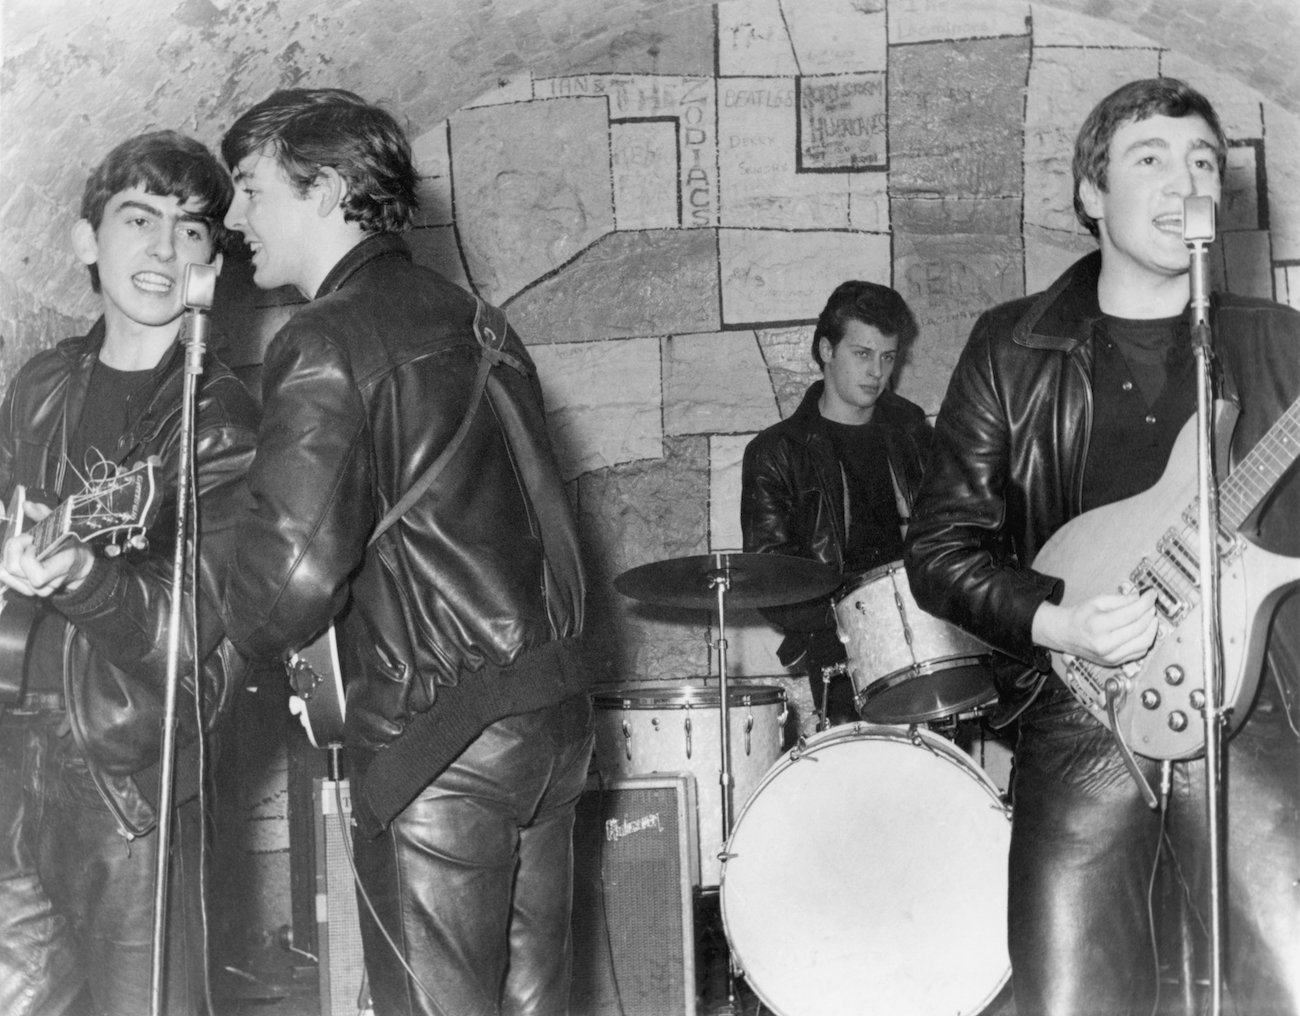 The Beatles in leather while performing at The Cavern Club in 1961.